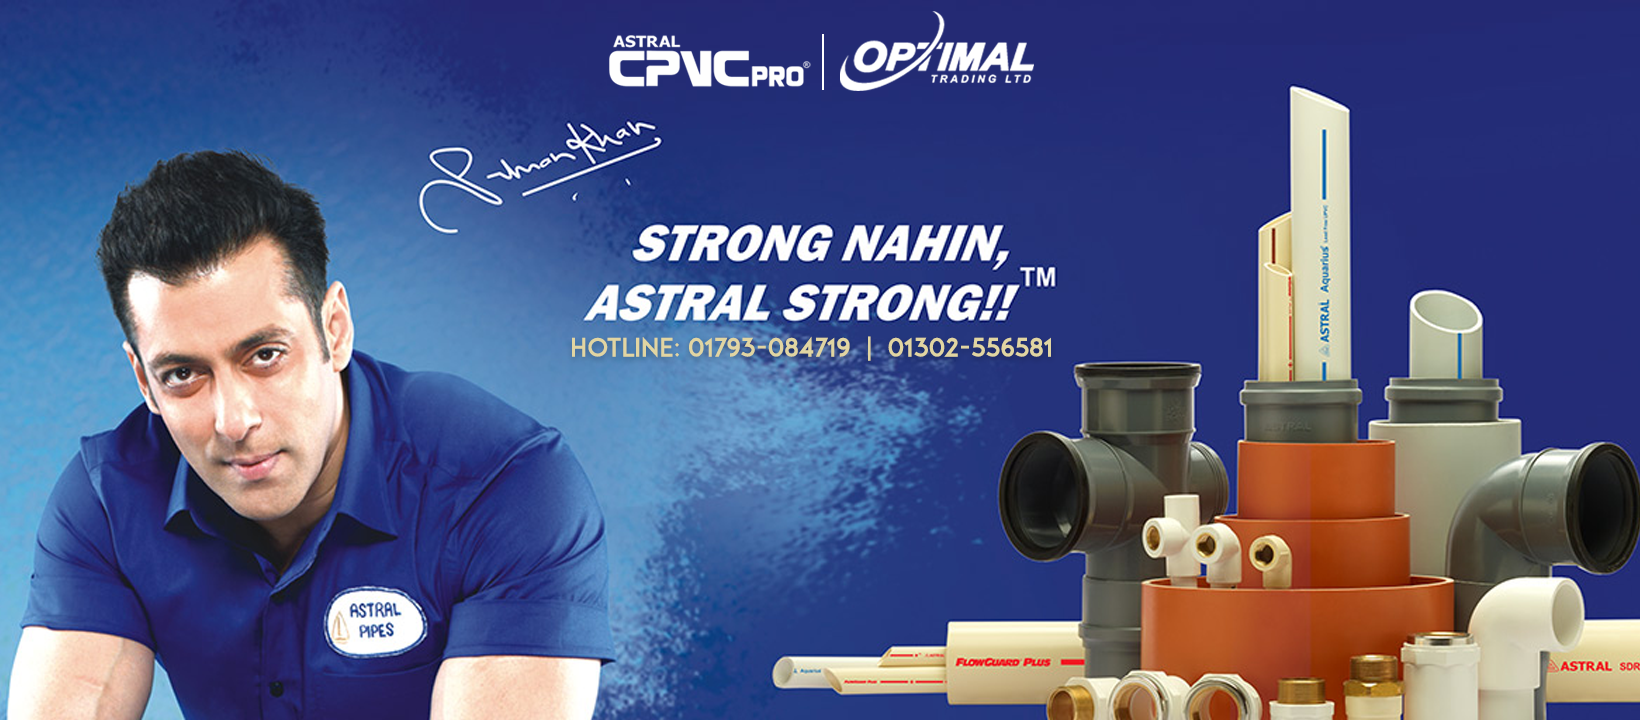 ASTRAL CPVC PIPE FITTINGS. Good Price, Better Delivery, Best Quality, Perfect Relation.